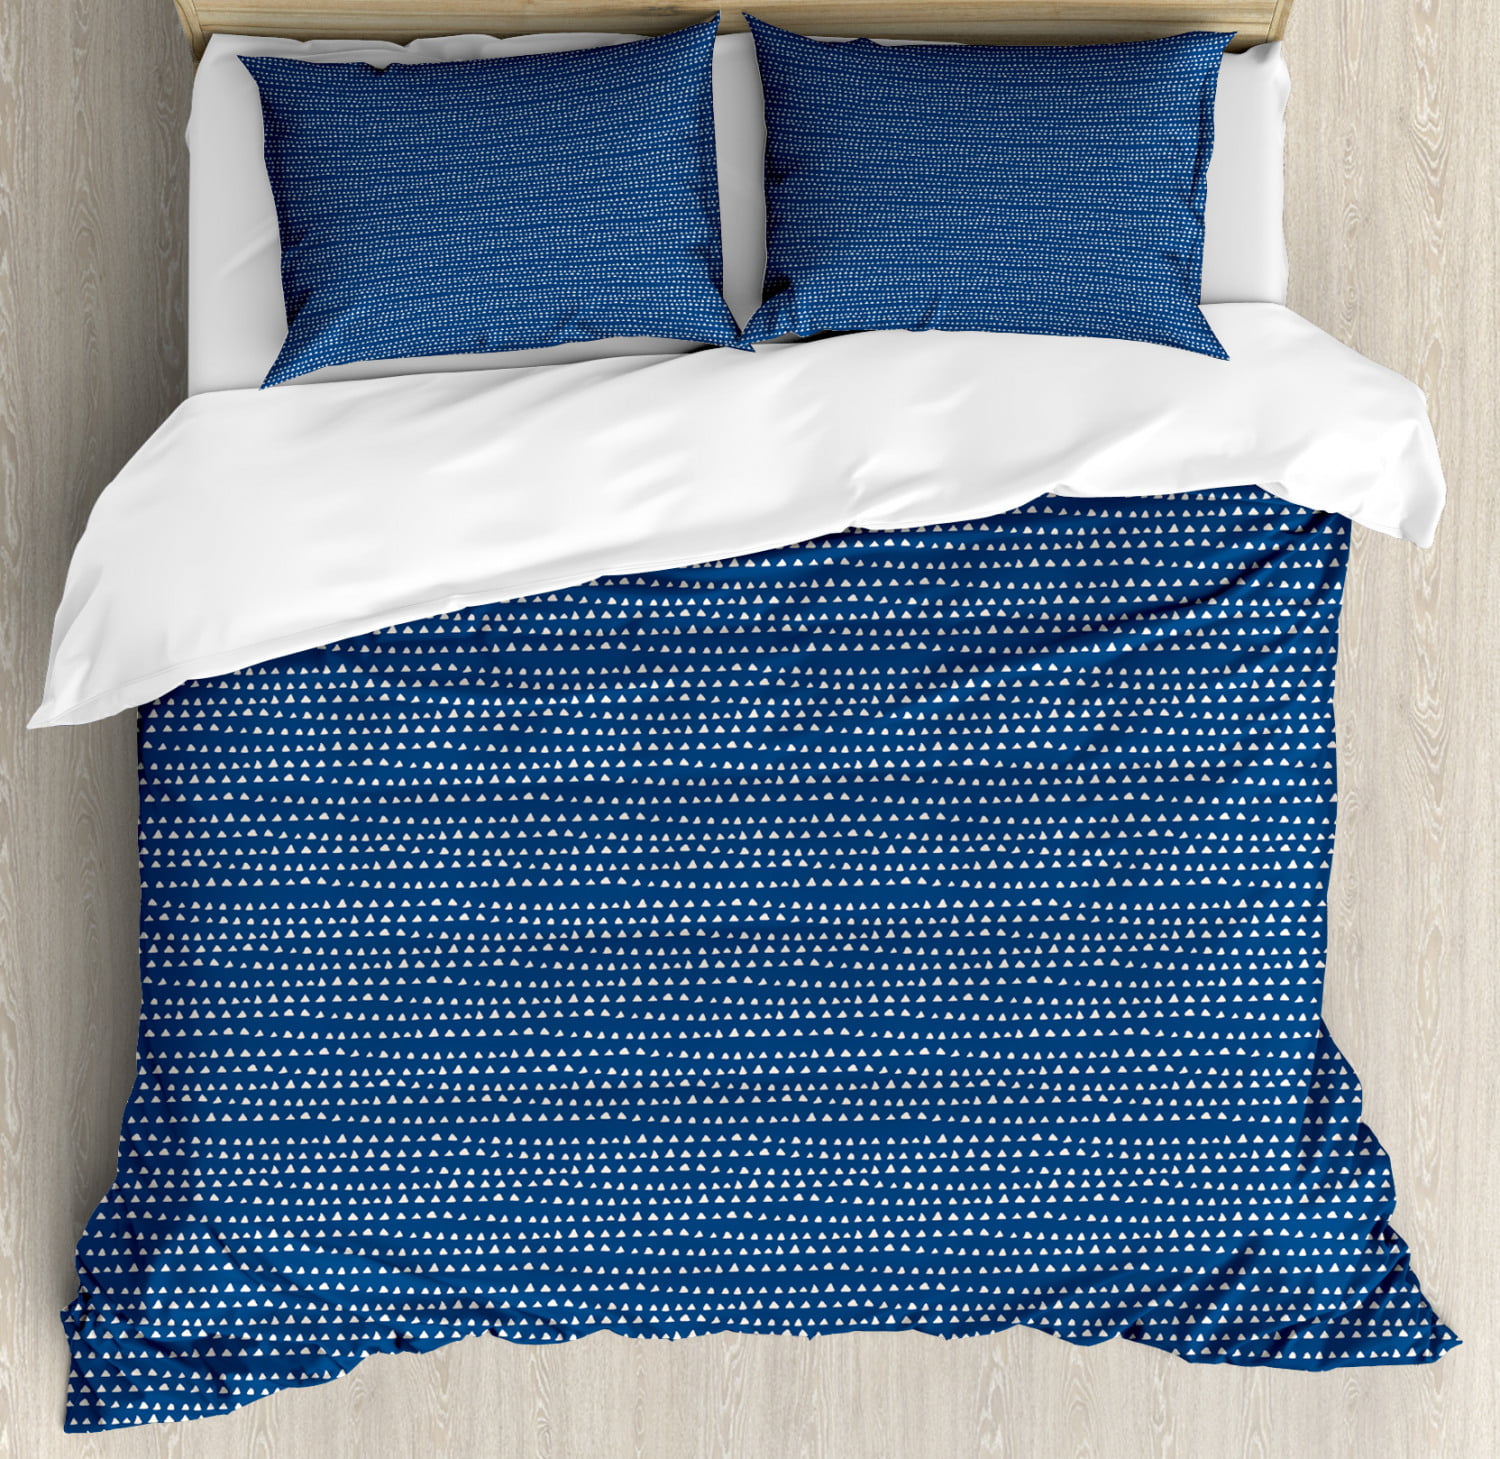 Blue And White Duvet Cover Set Hand Drawn Style Pattern With